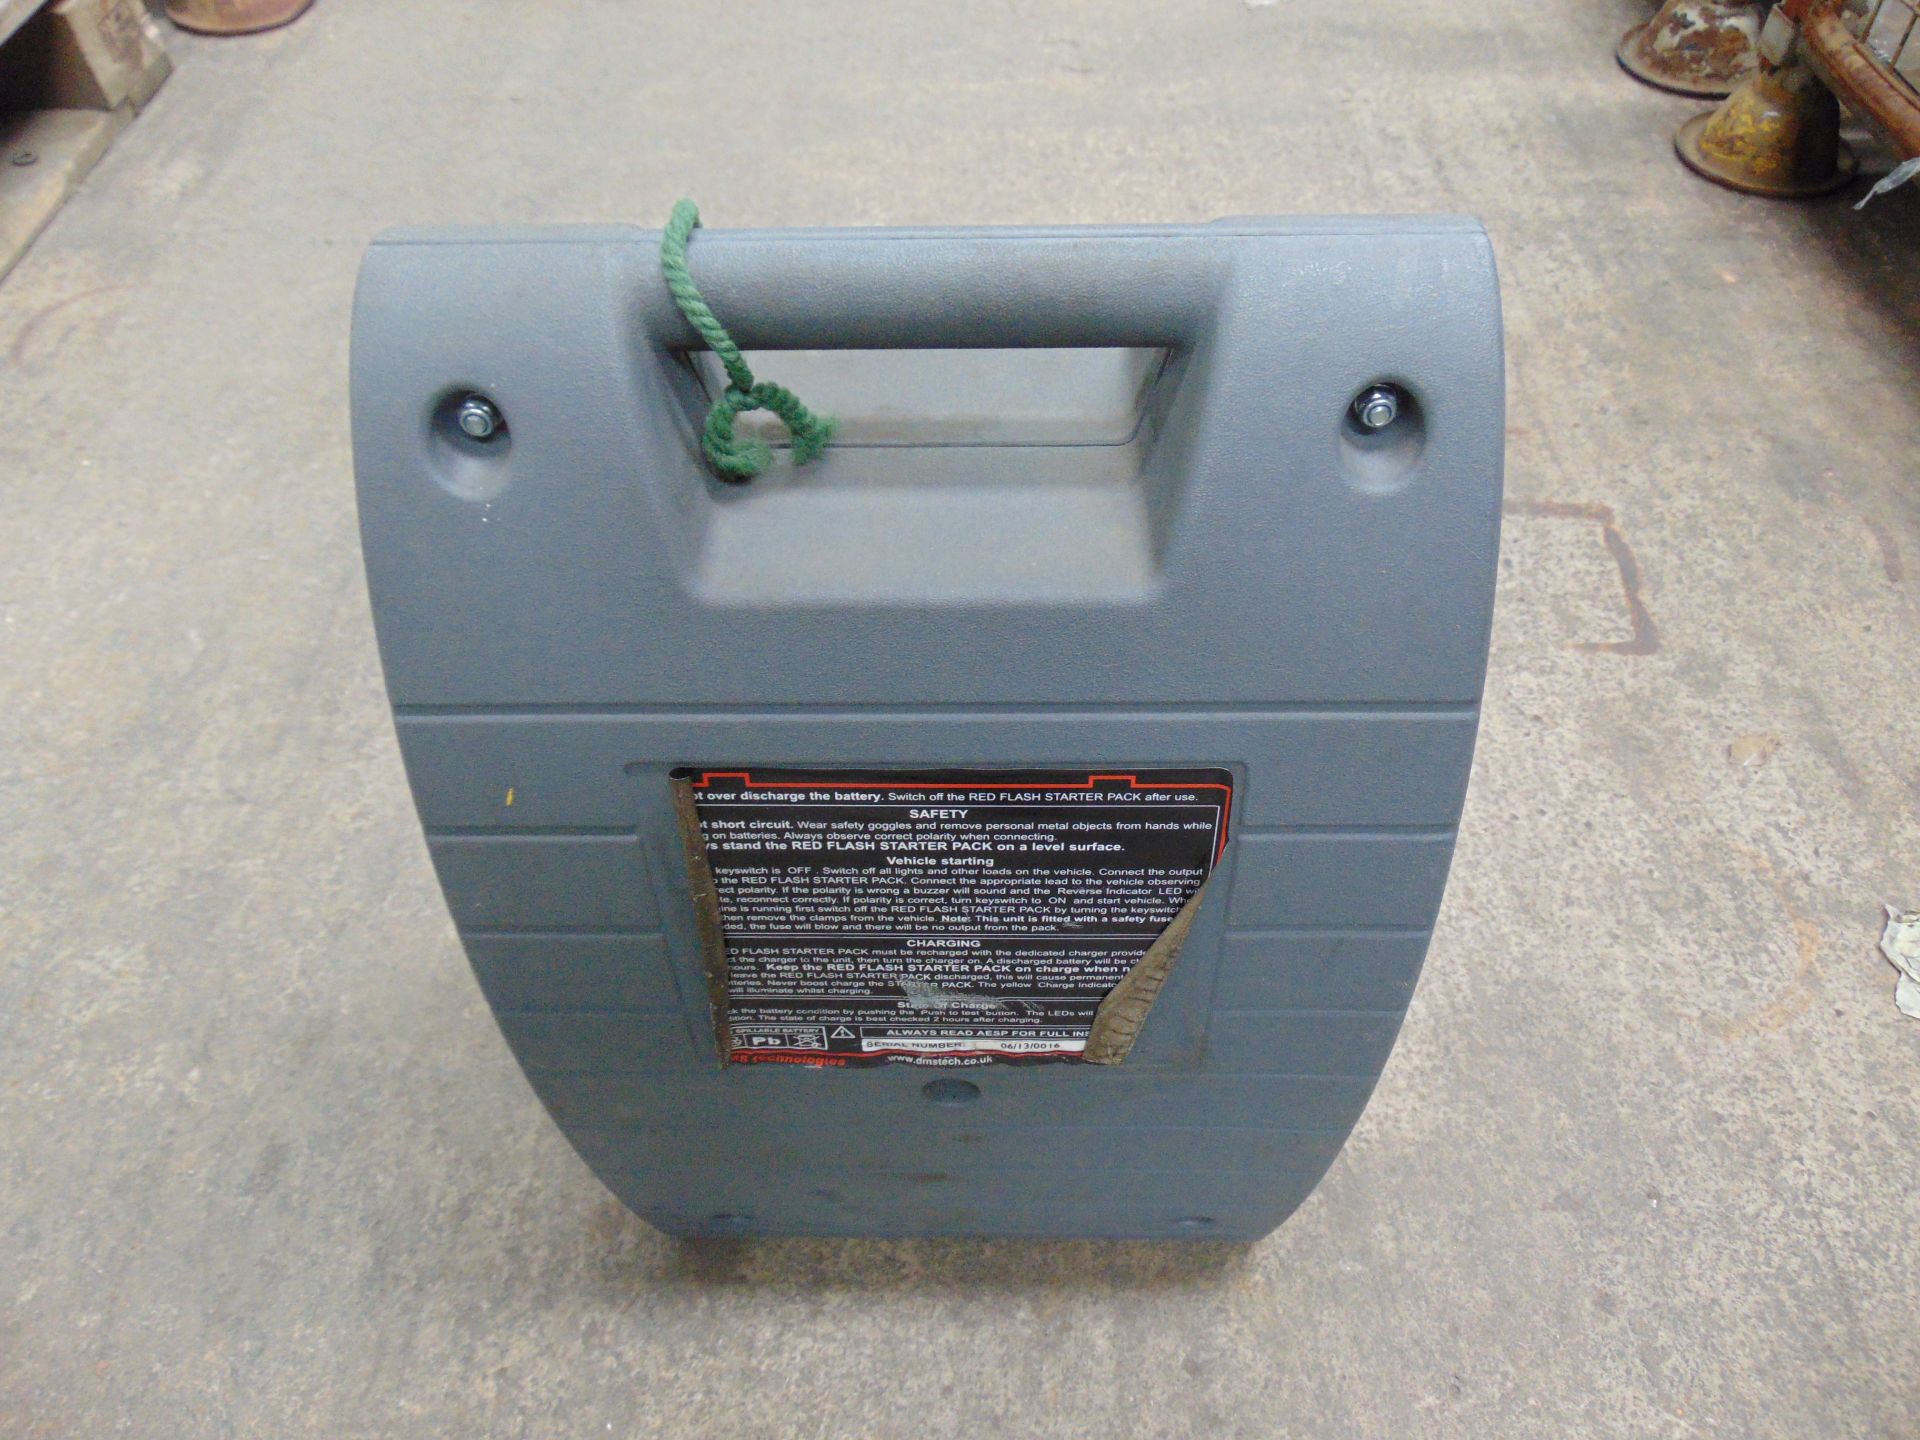 High Rate RF-850 12V Battery Pack - Image 2 of 3